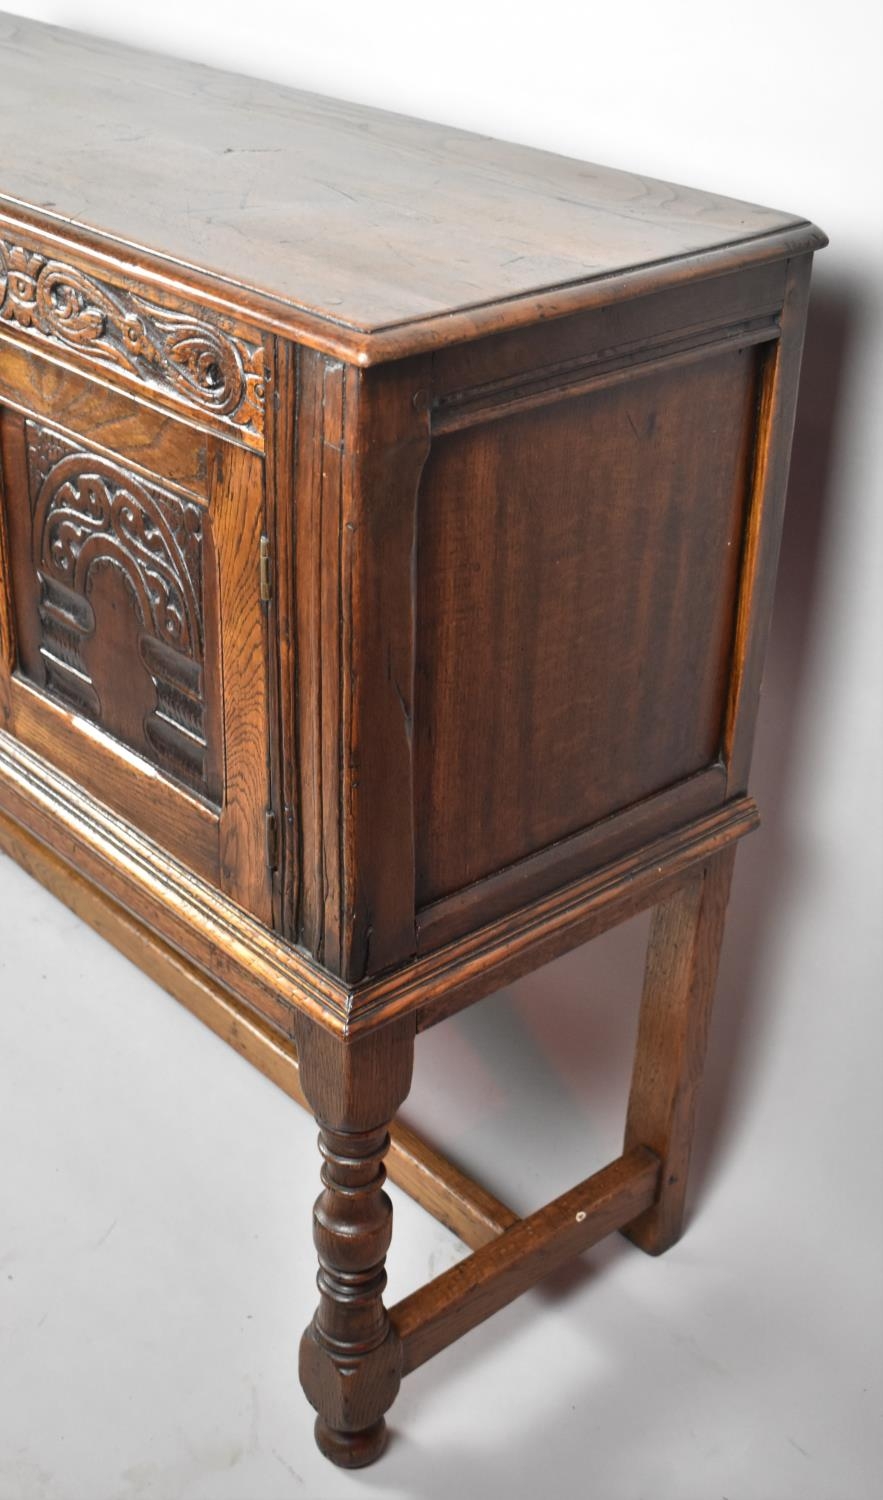 A Nice Quality Oak Double Pot Cupboard with Carved Panelled Front by Cave of Birmingham, 122cm Wide - Image 3 of 3